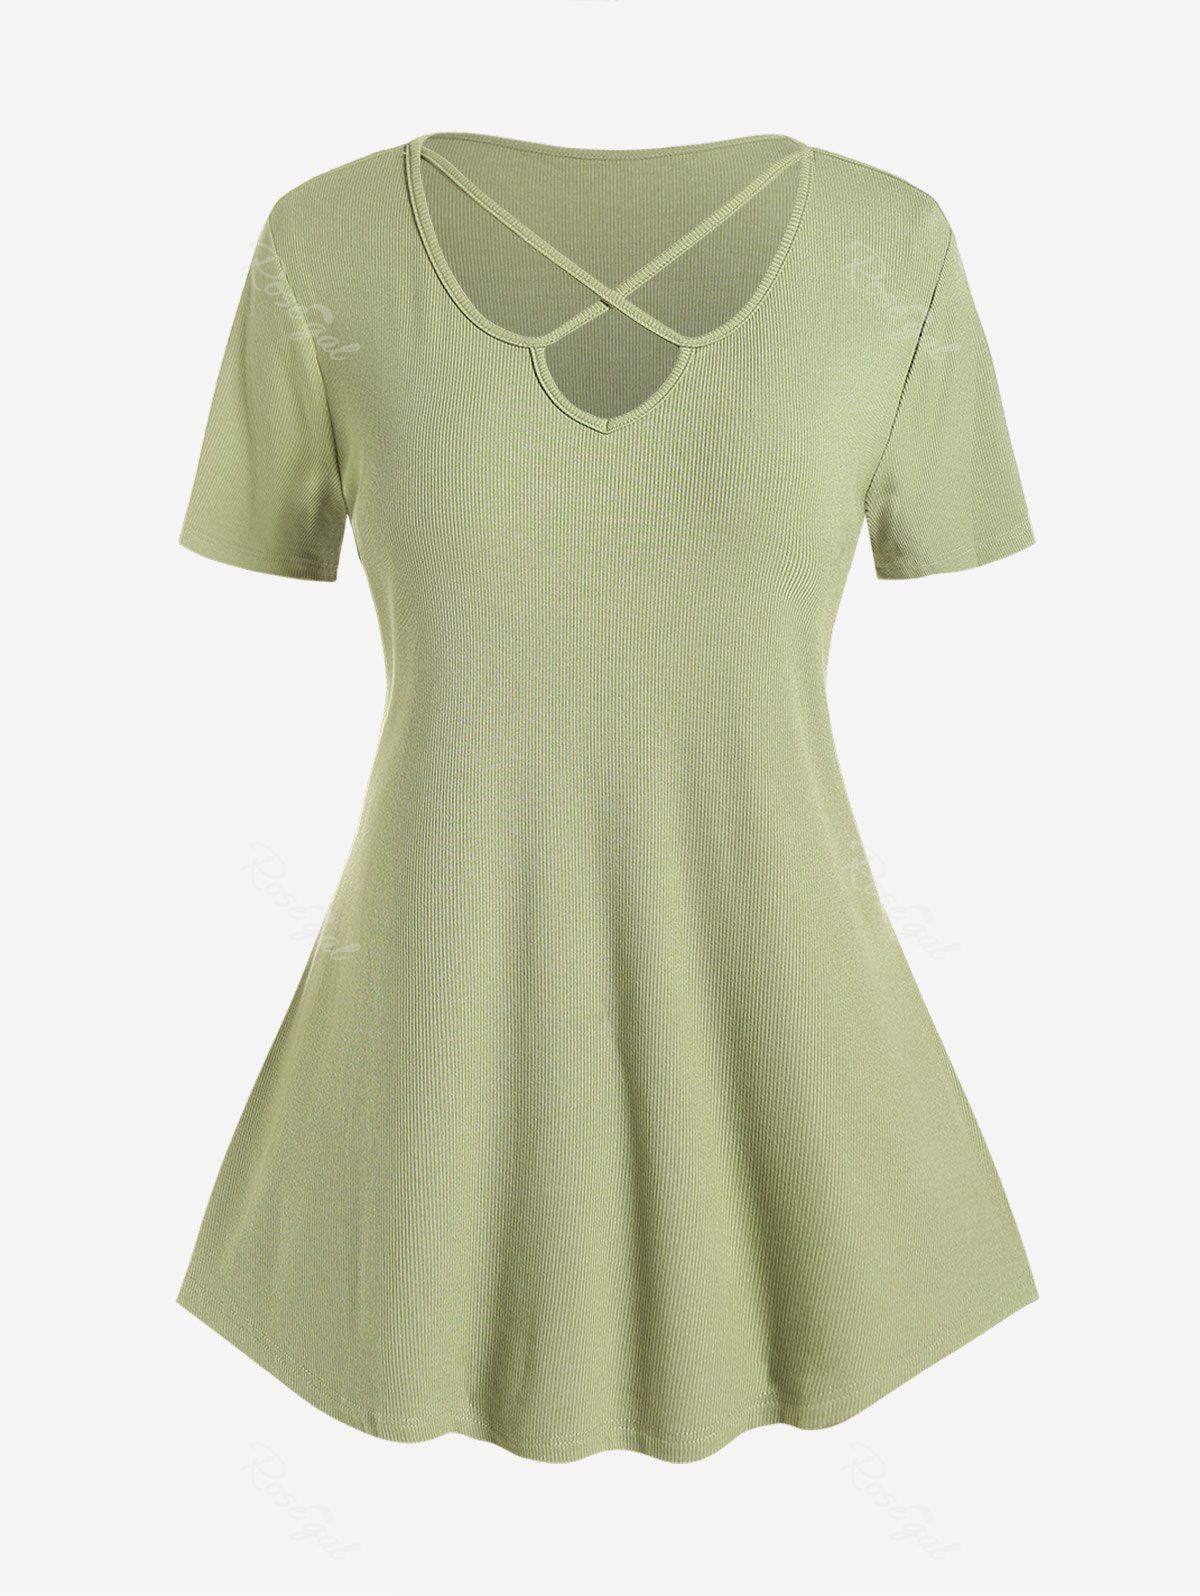 New Plus Size Crisscross Short Sleeves Ribbed Tee  